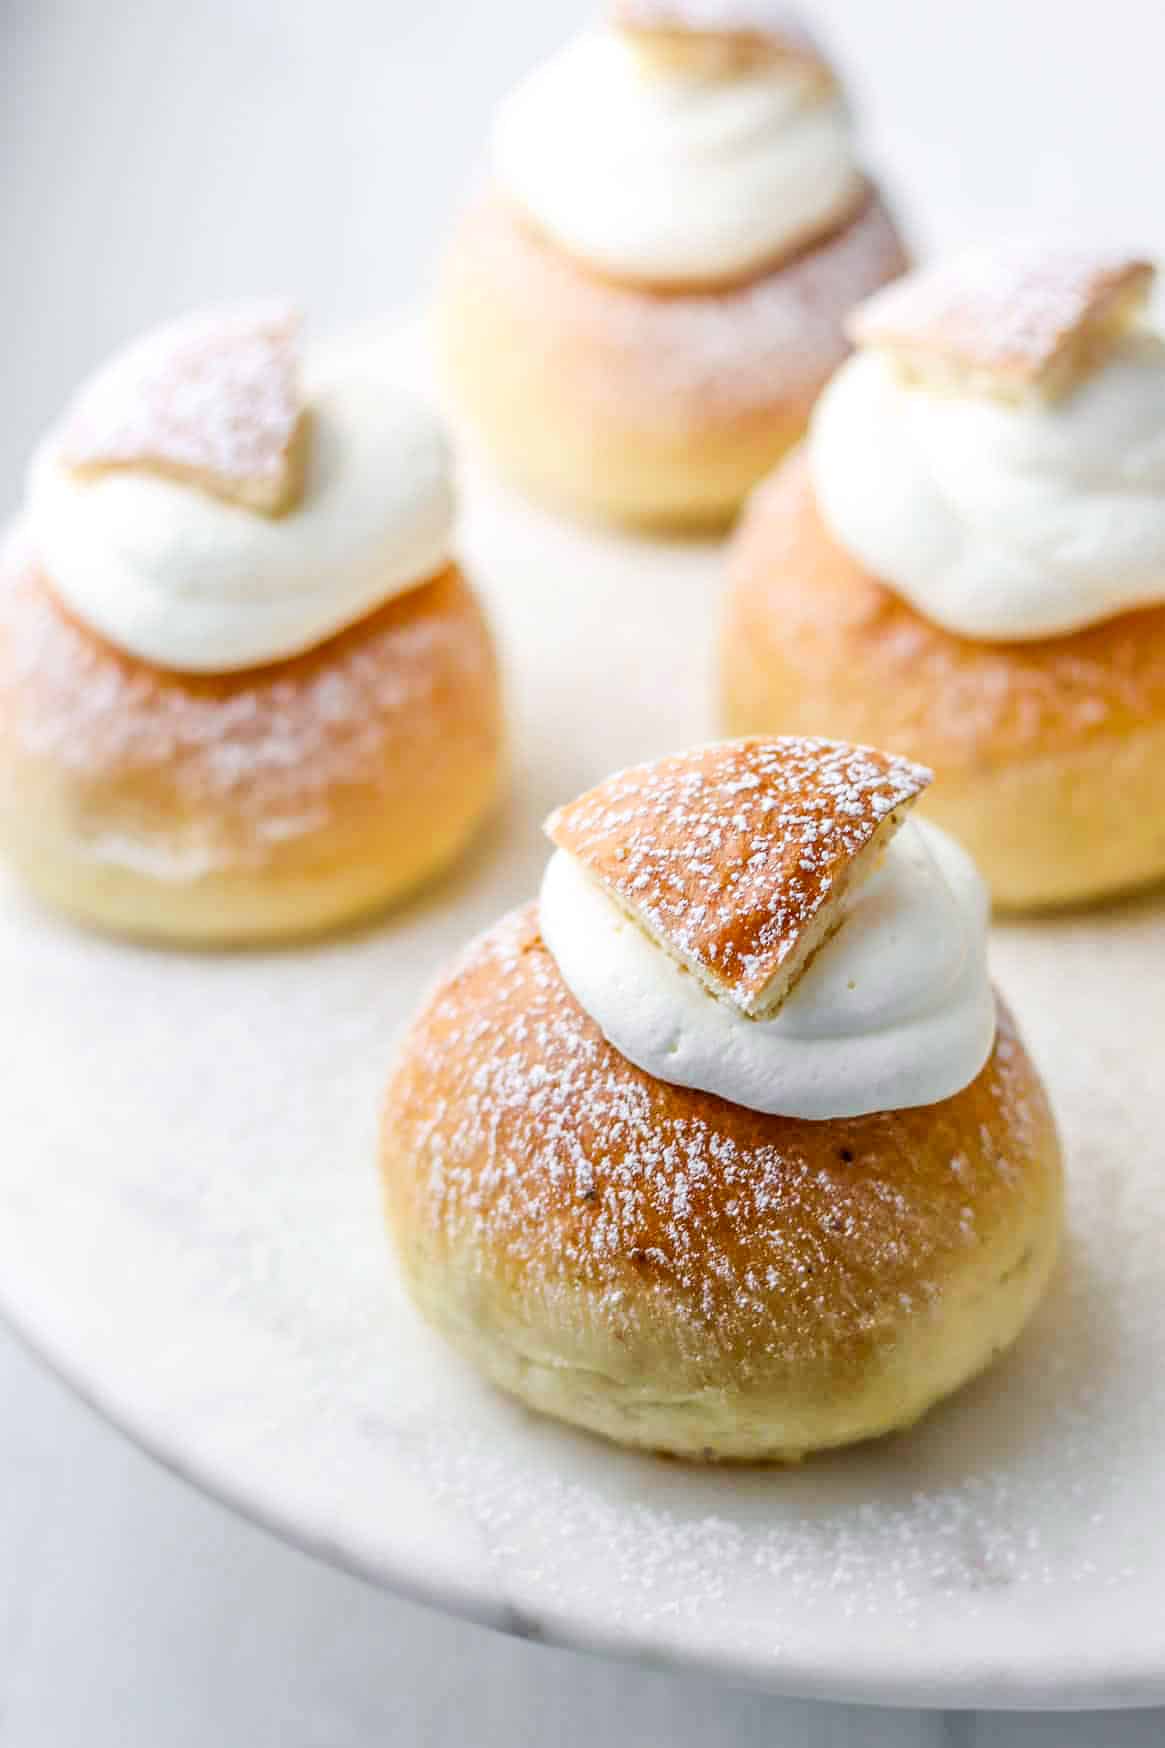 Four Swedish semlor on a marble plate.